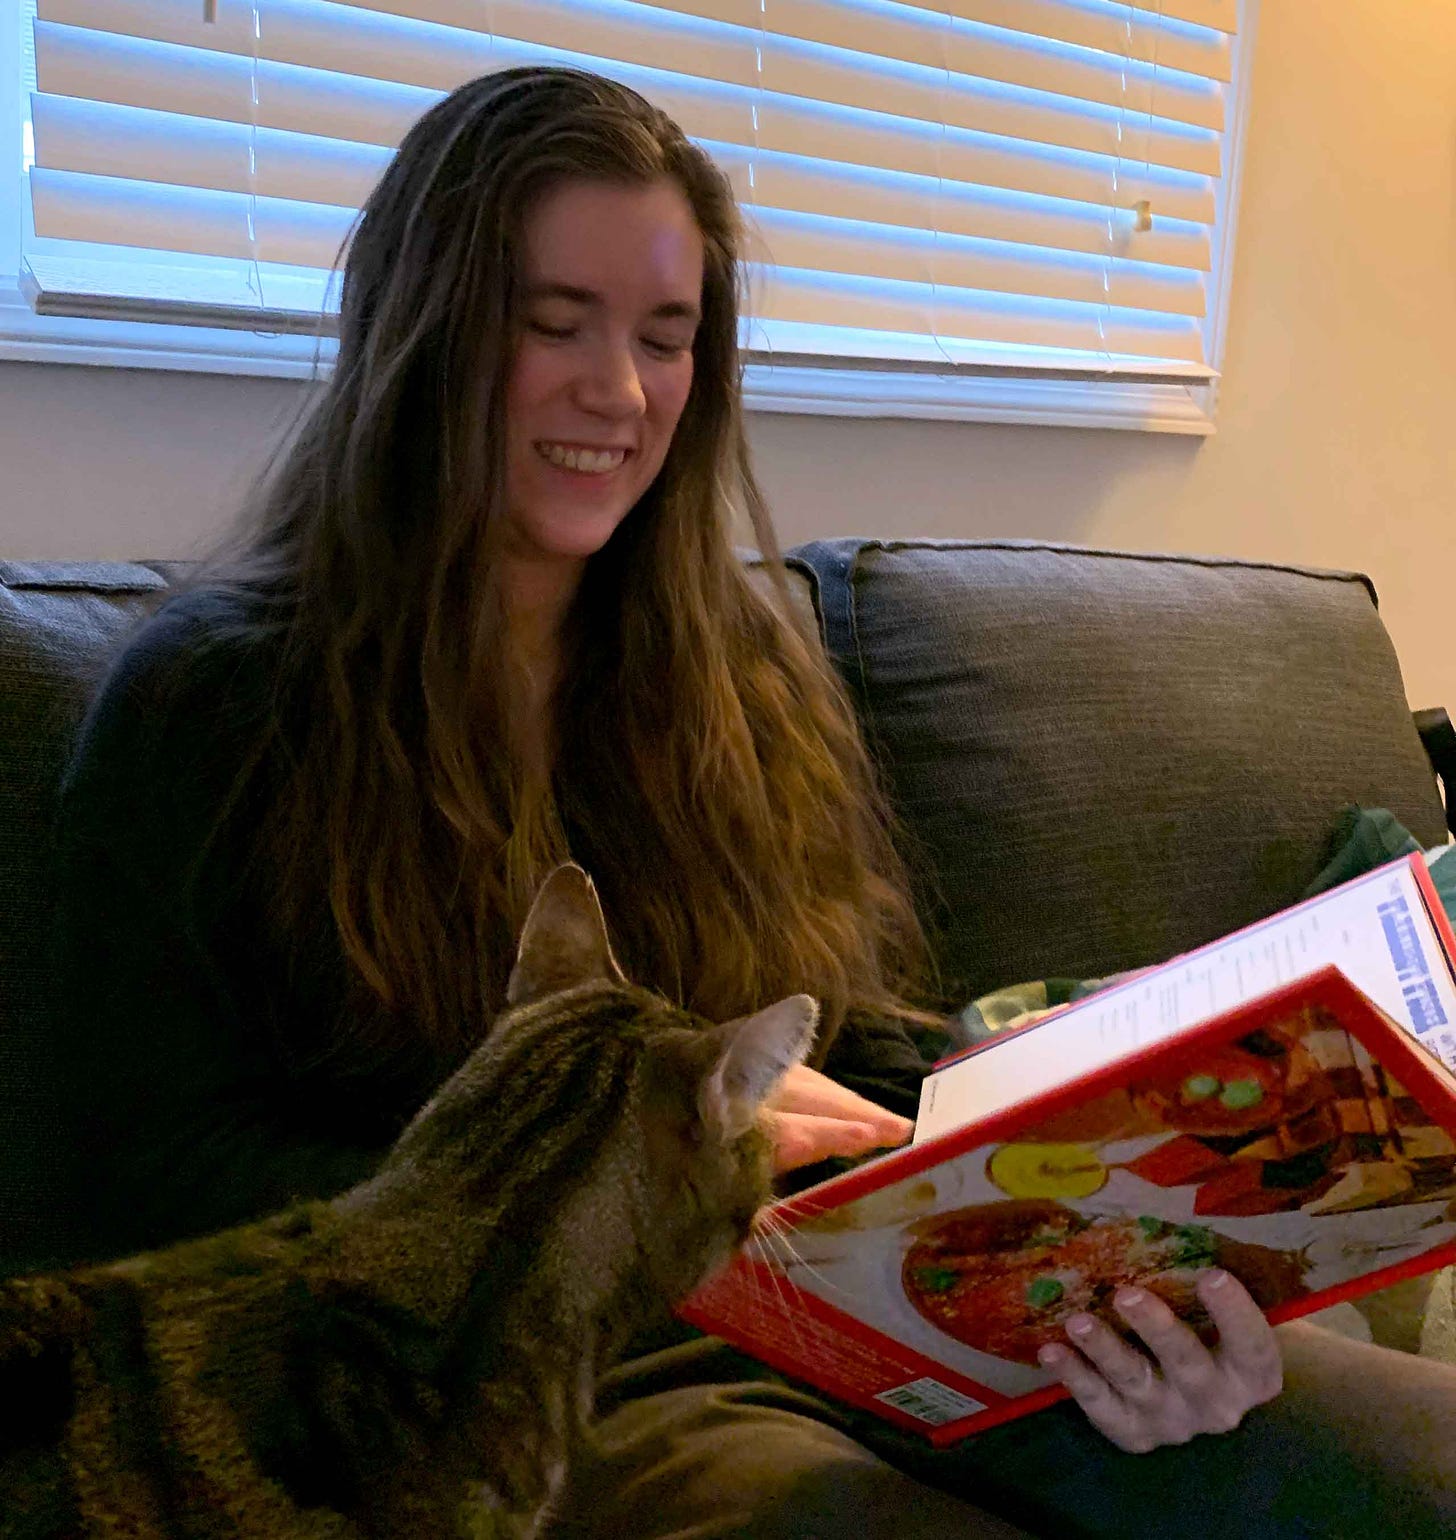 Kayla Stark and her cat Squidge looking through a cookbook